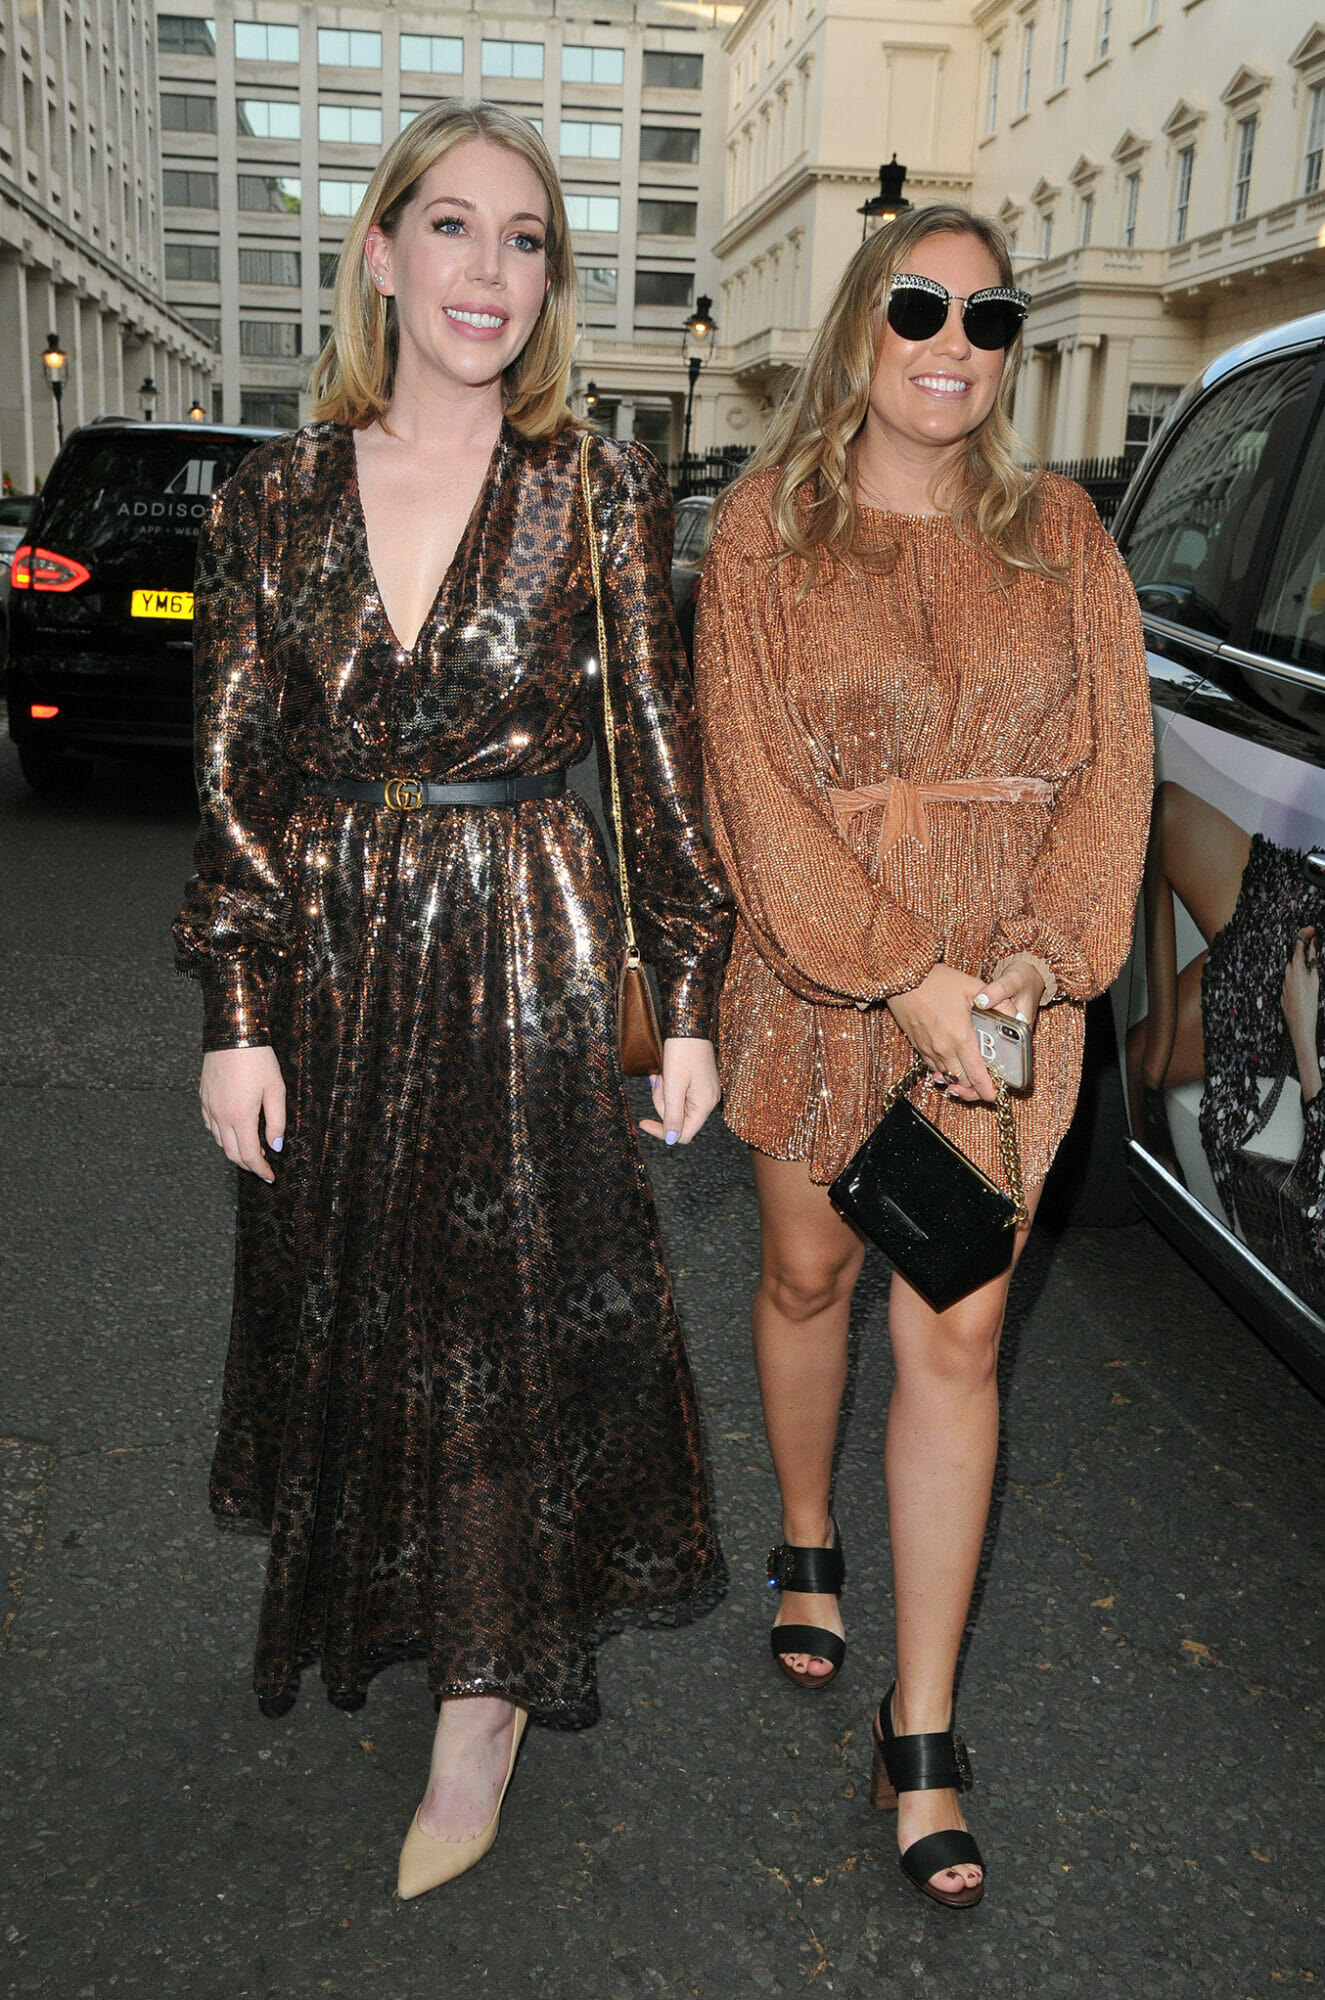 Katherine Ryan on the left smiling and Jennifer Machalski-Bray on the right wearing sunglasses both waling on the street wearing heels